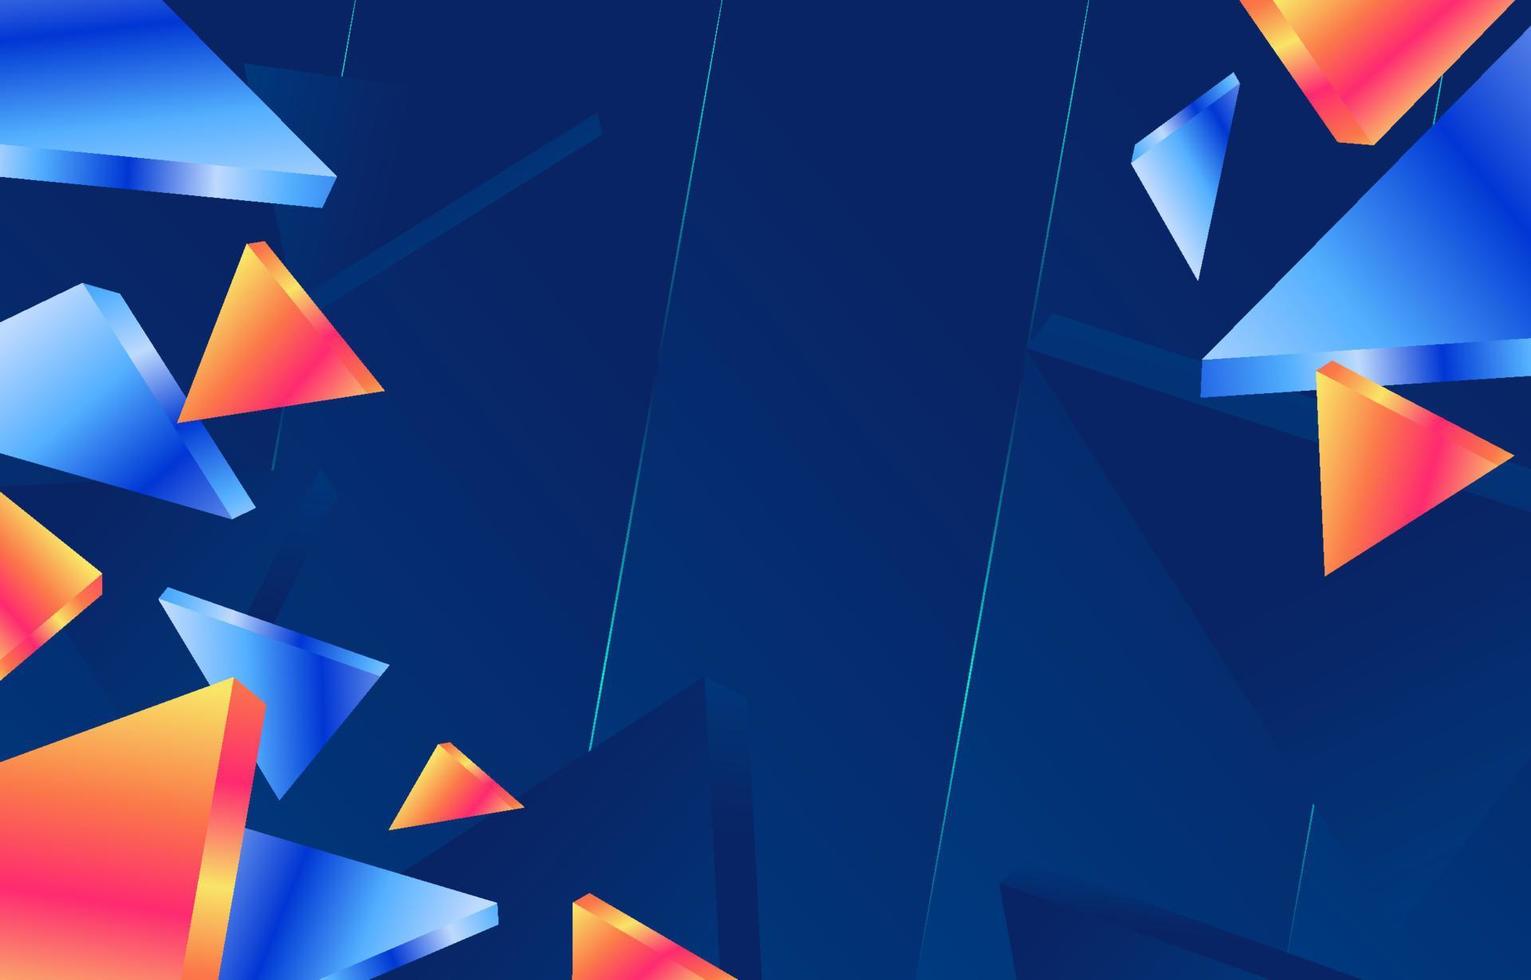 Colorful Triangular Fraction Background vector